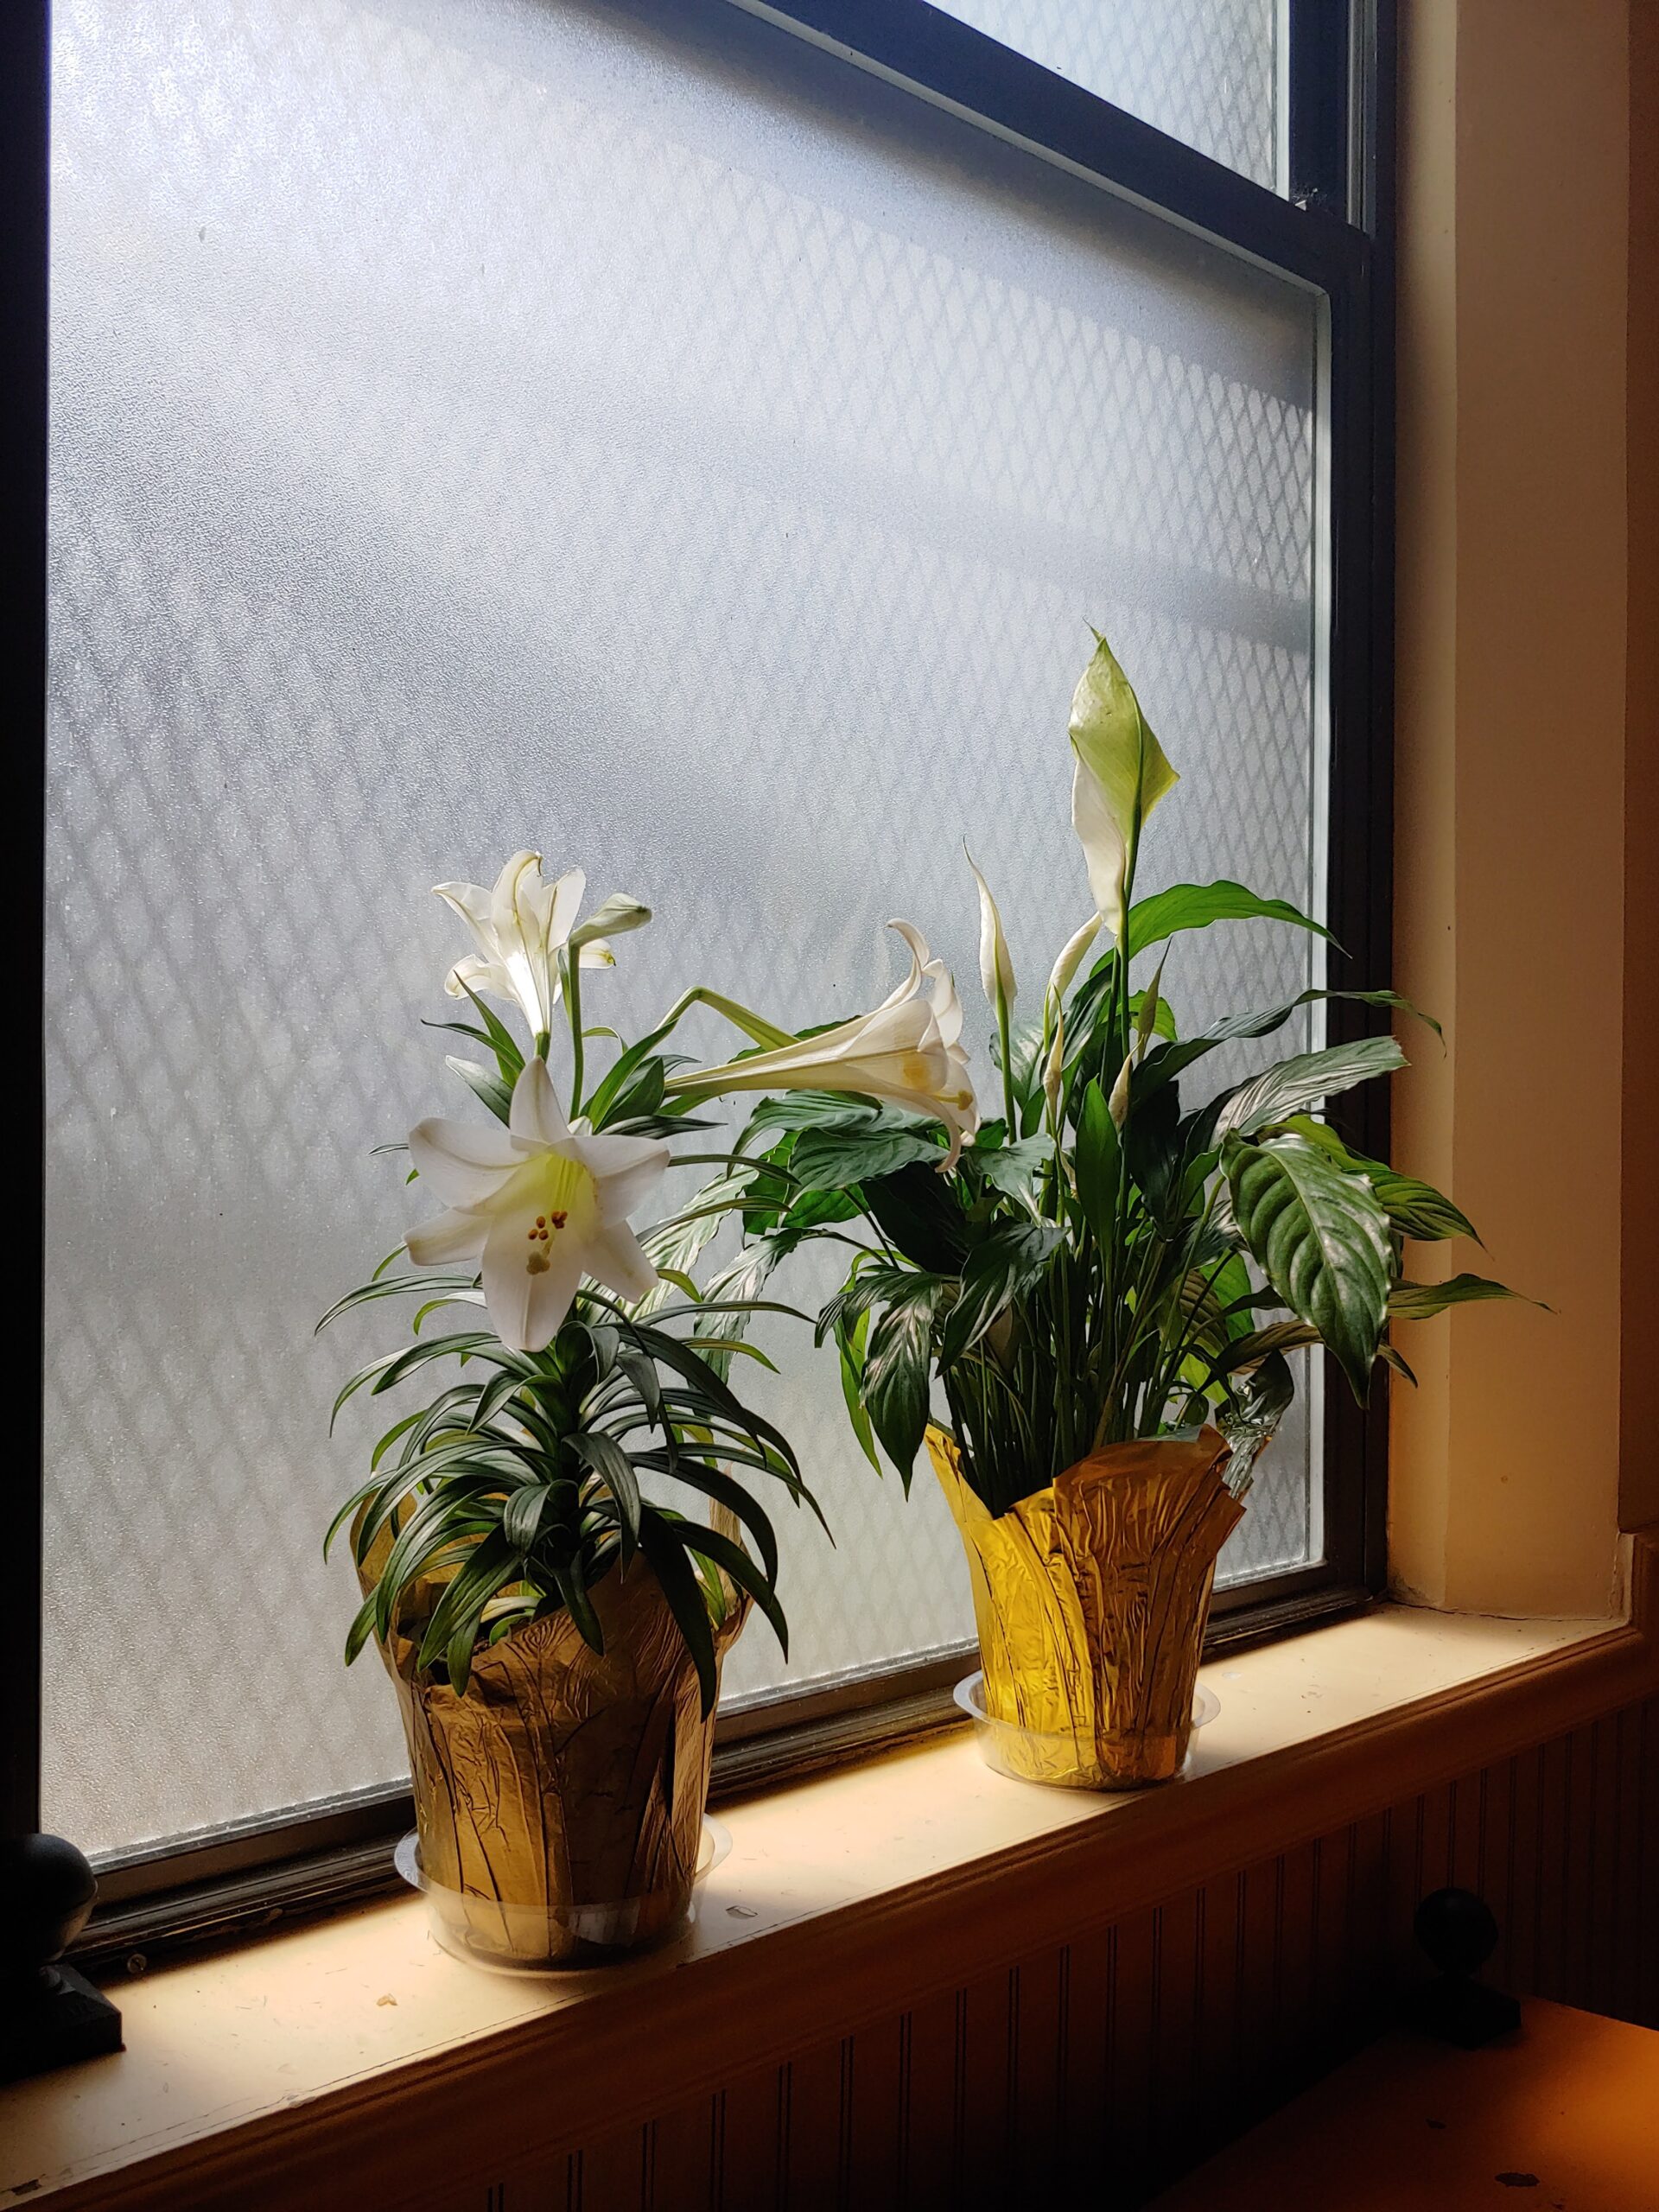 Photograph of white lilies in a window.